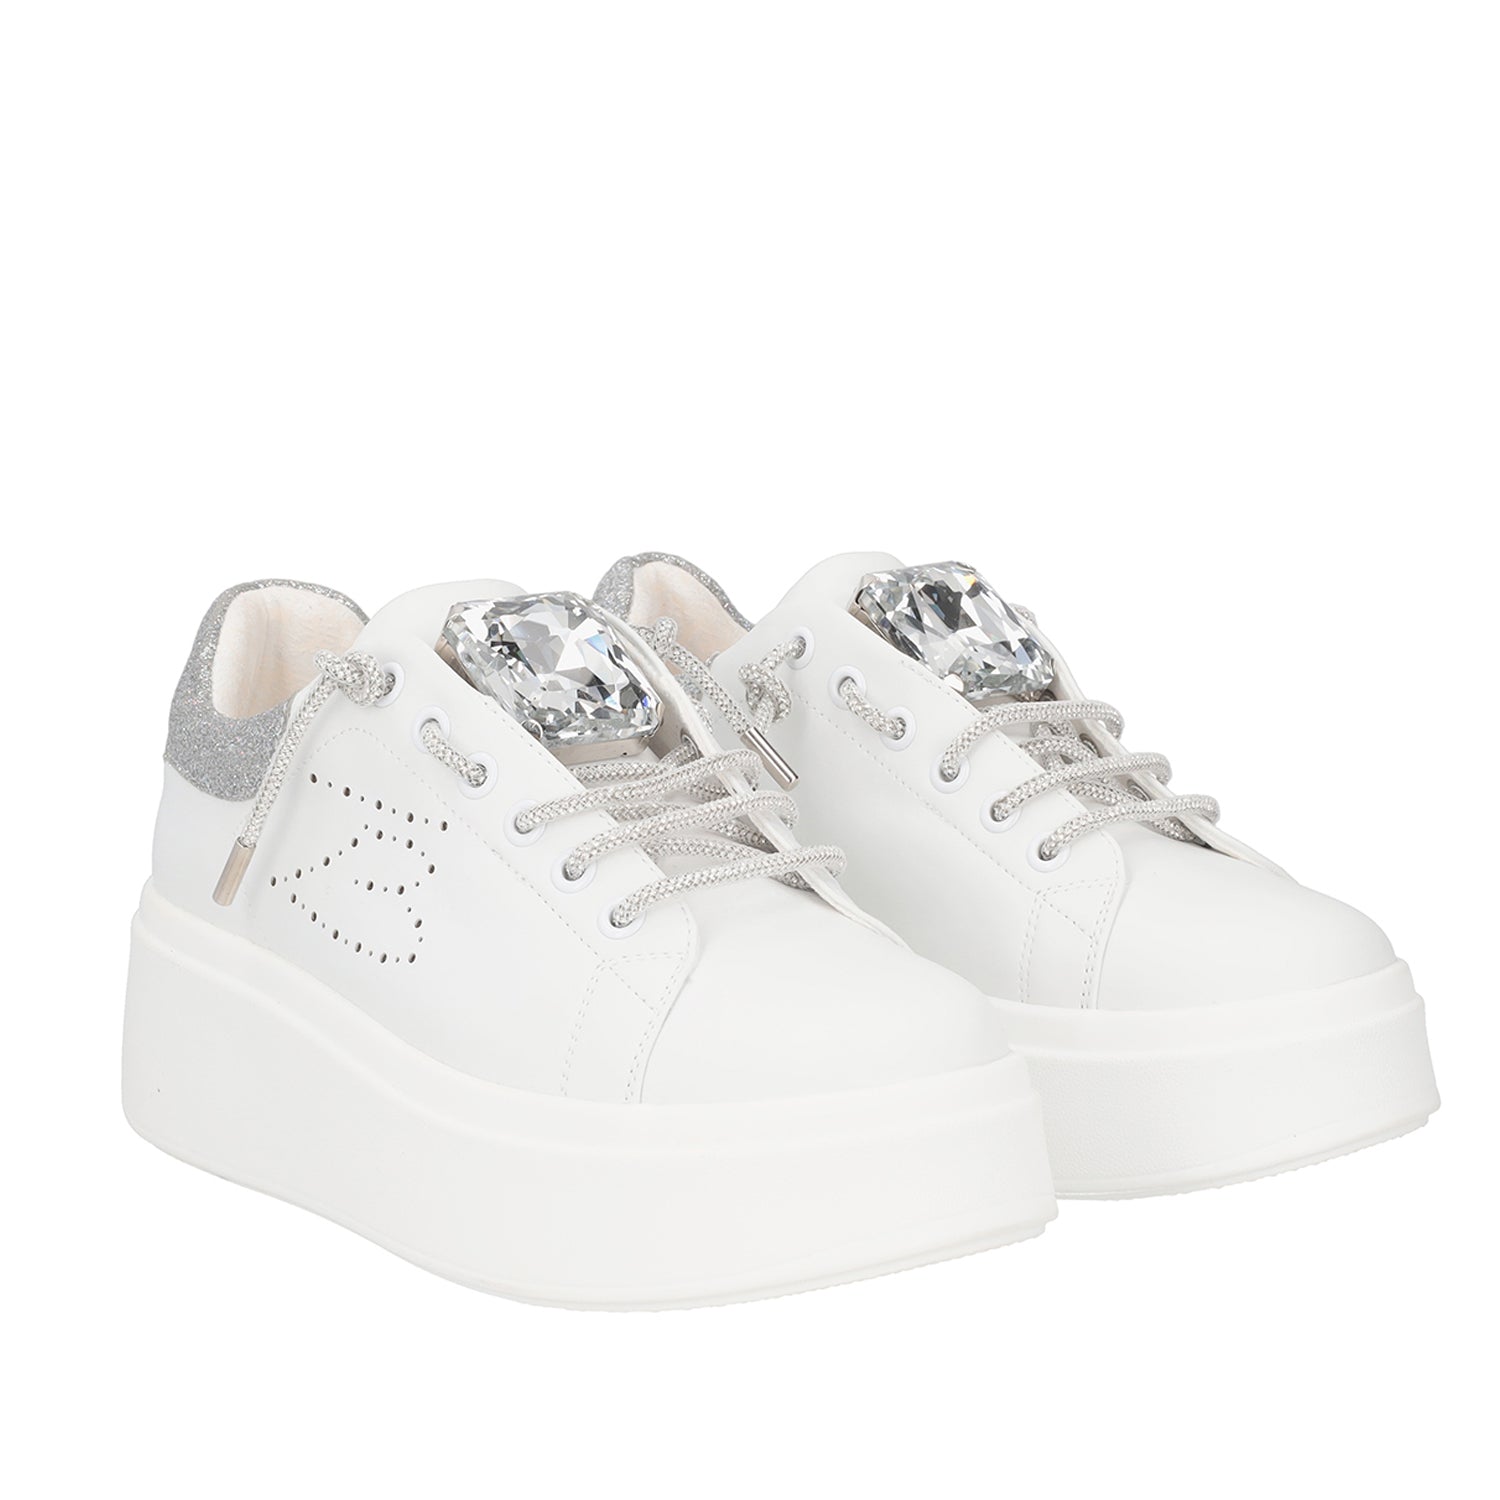 WHITE/SILVER VANITY SNEAKER WITH STONE AND RHINESTONES LACE